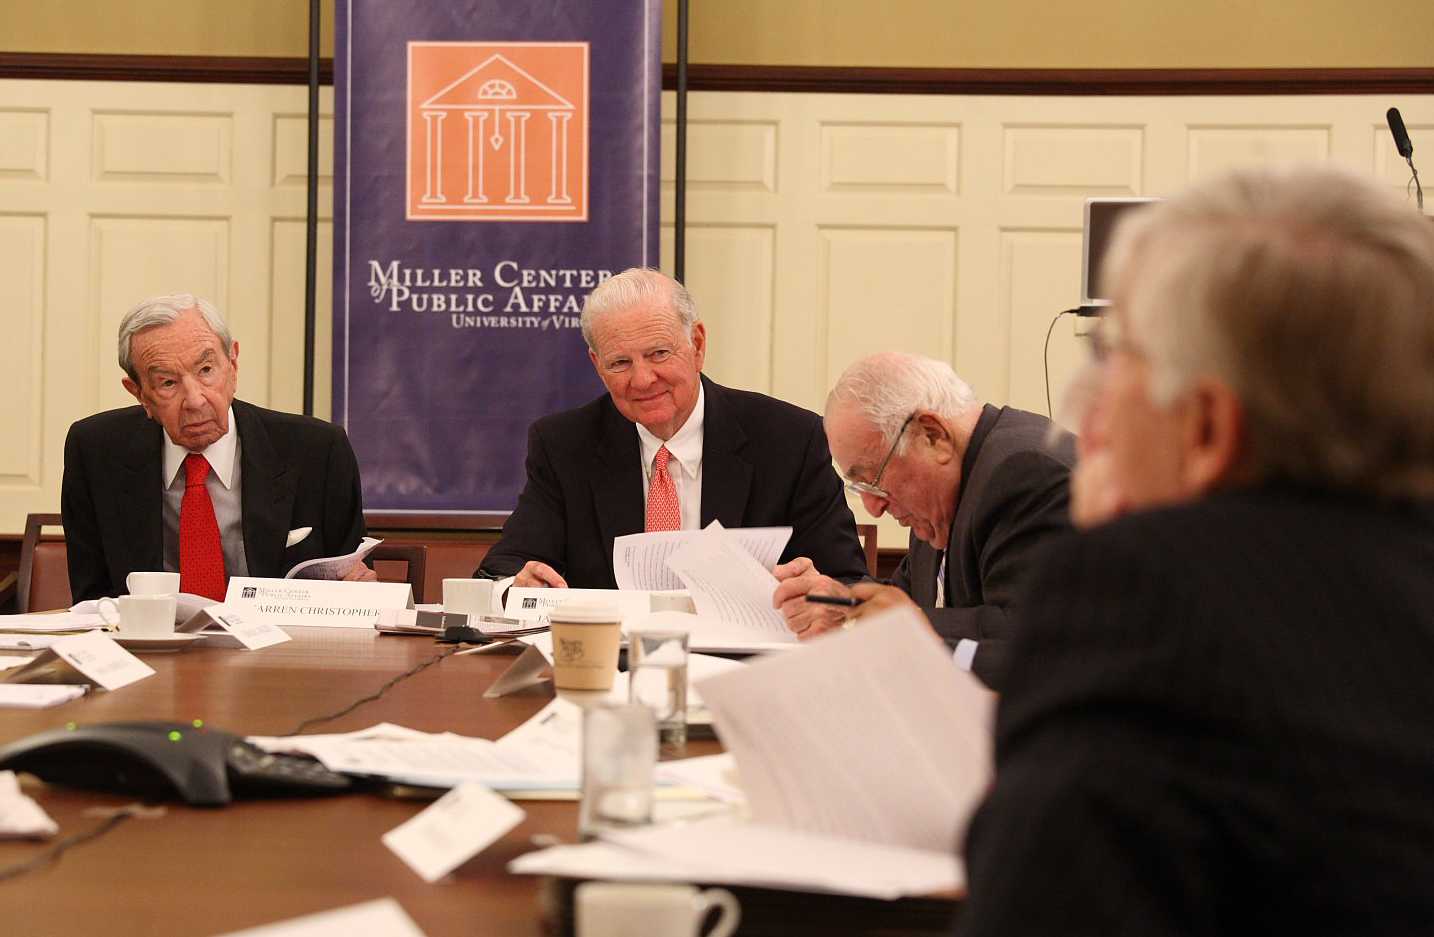  Warren Christopher, left, and James Baker, right, lsiten to a man talking from a table